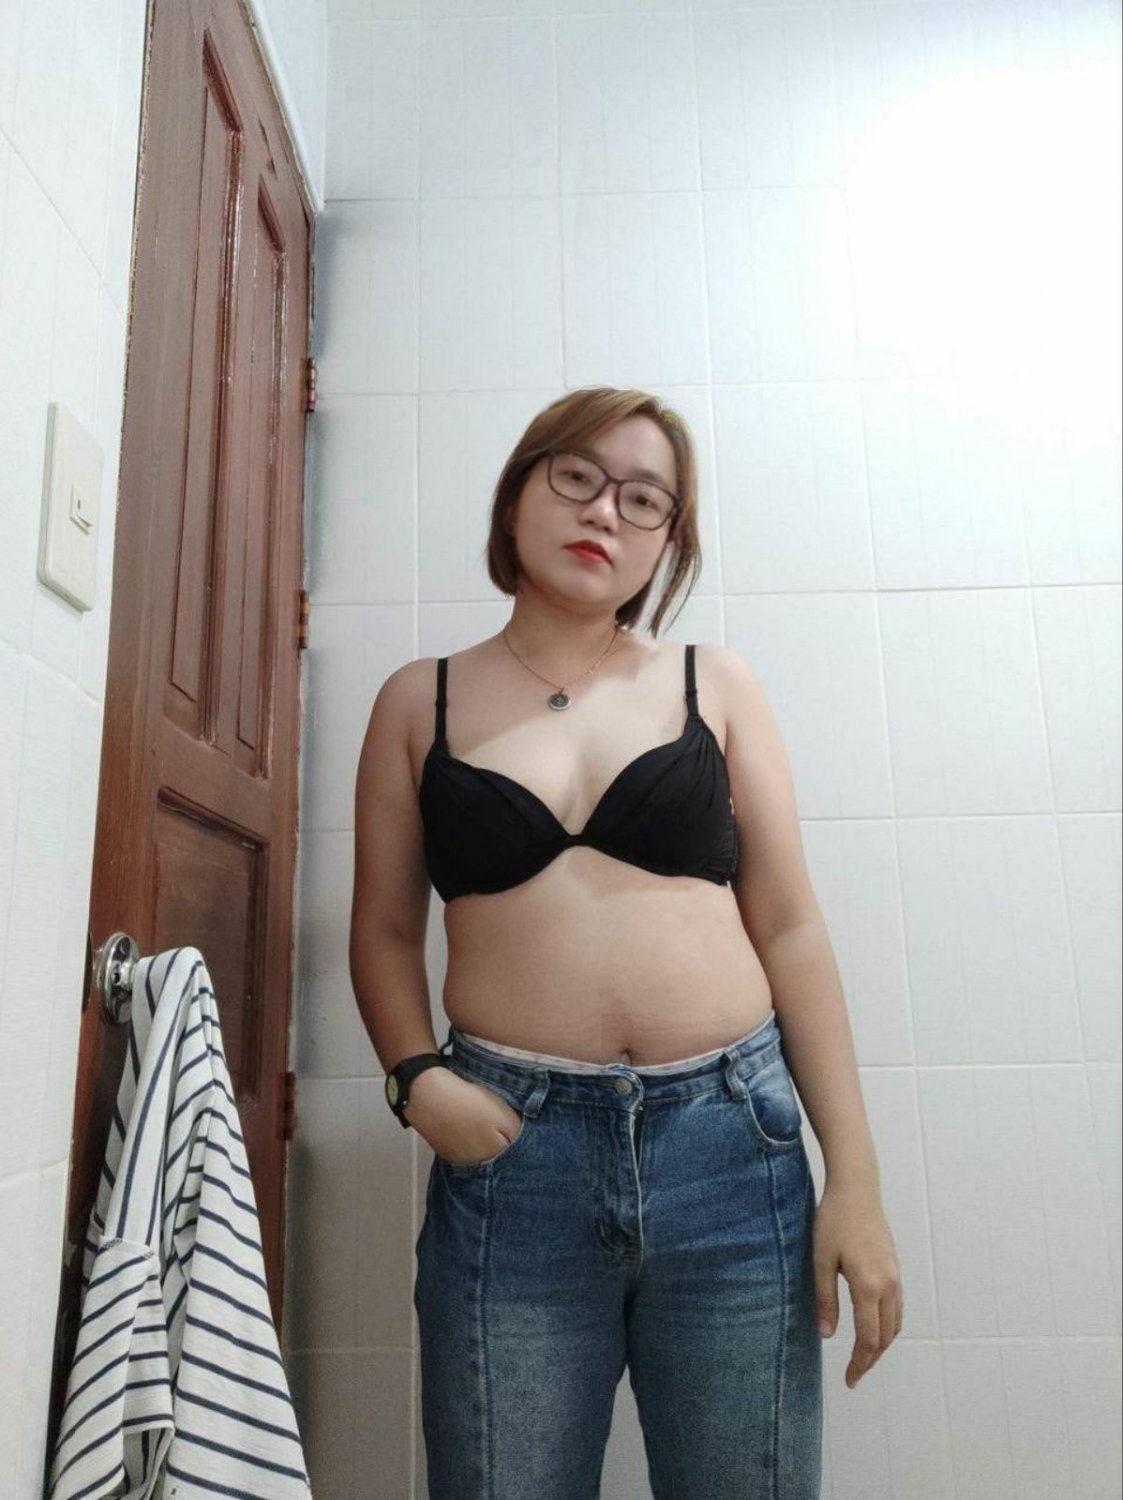 Vietnamese whore wanted her body seen by all #wLOkM4QR